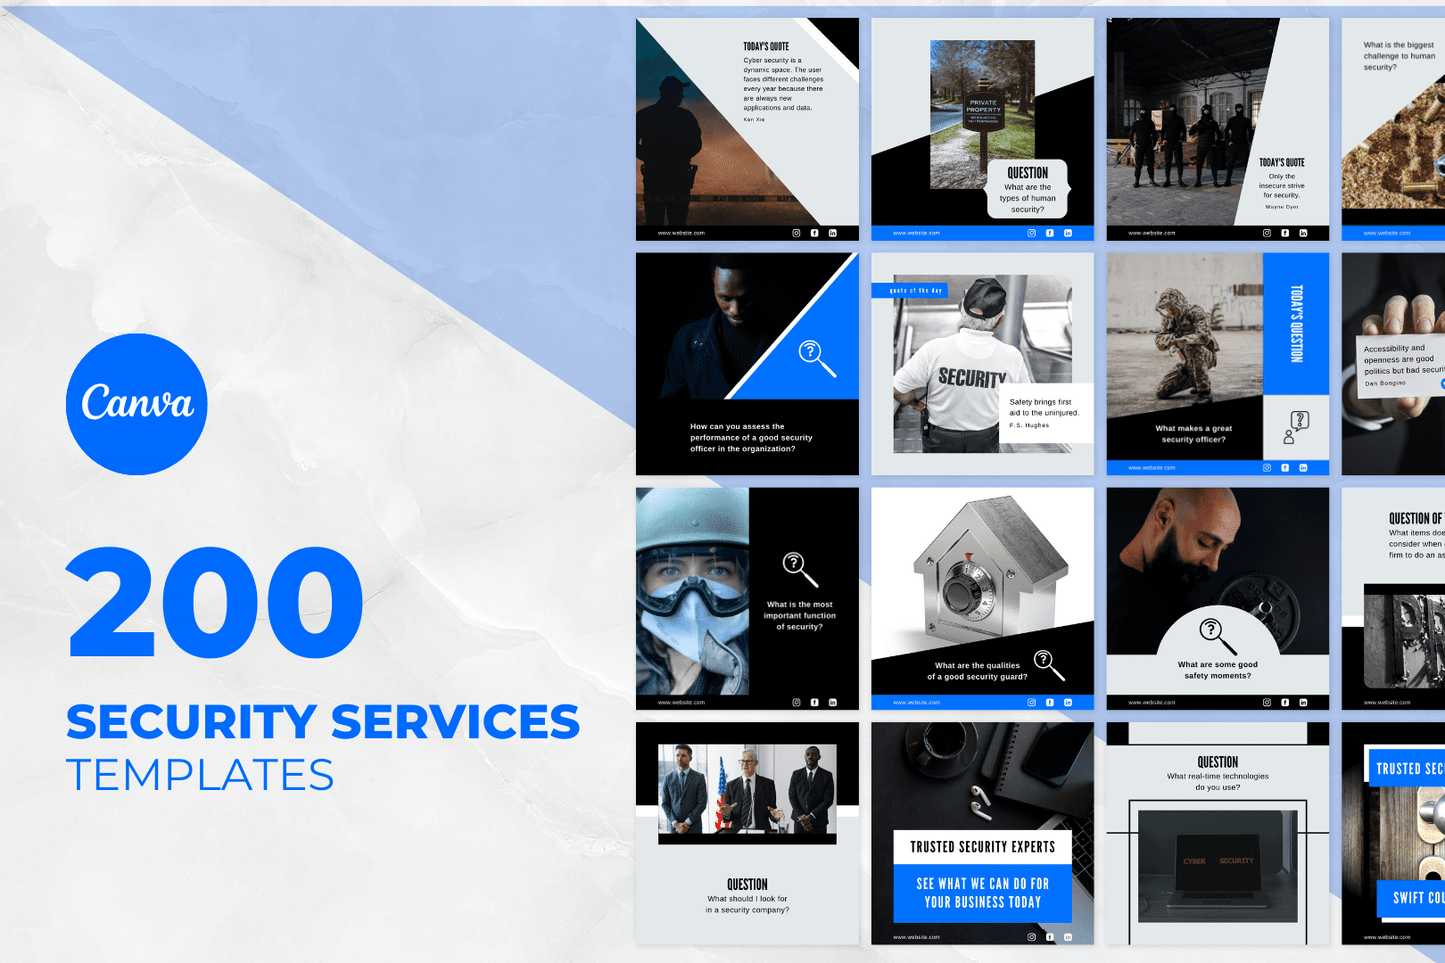 200 Security Services Templates for Social Media